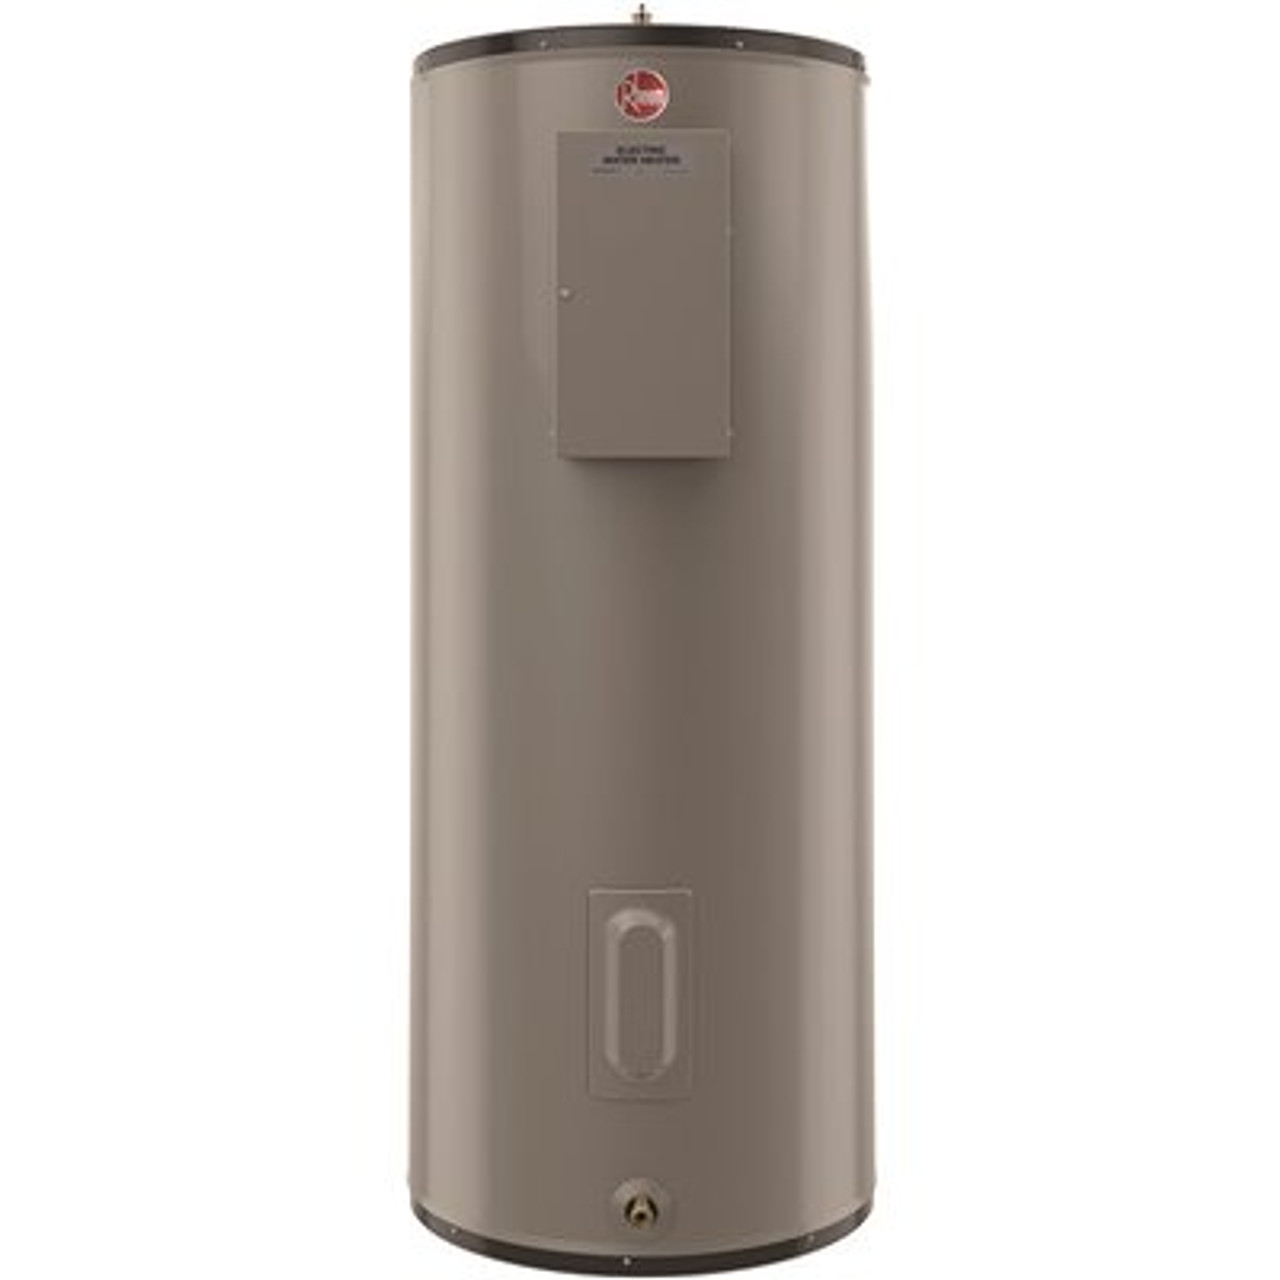 Rheem Light Duty 50 gal. 208-Volt 9kw Multi Phase Commercial Field Convertible Electric Tank Water Heater